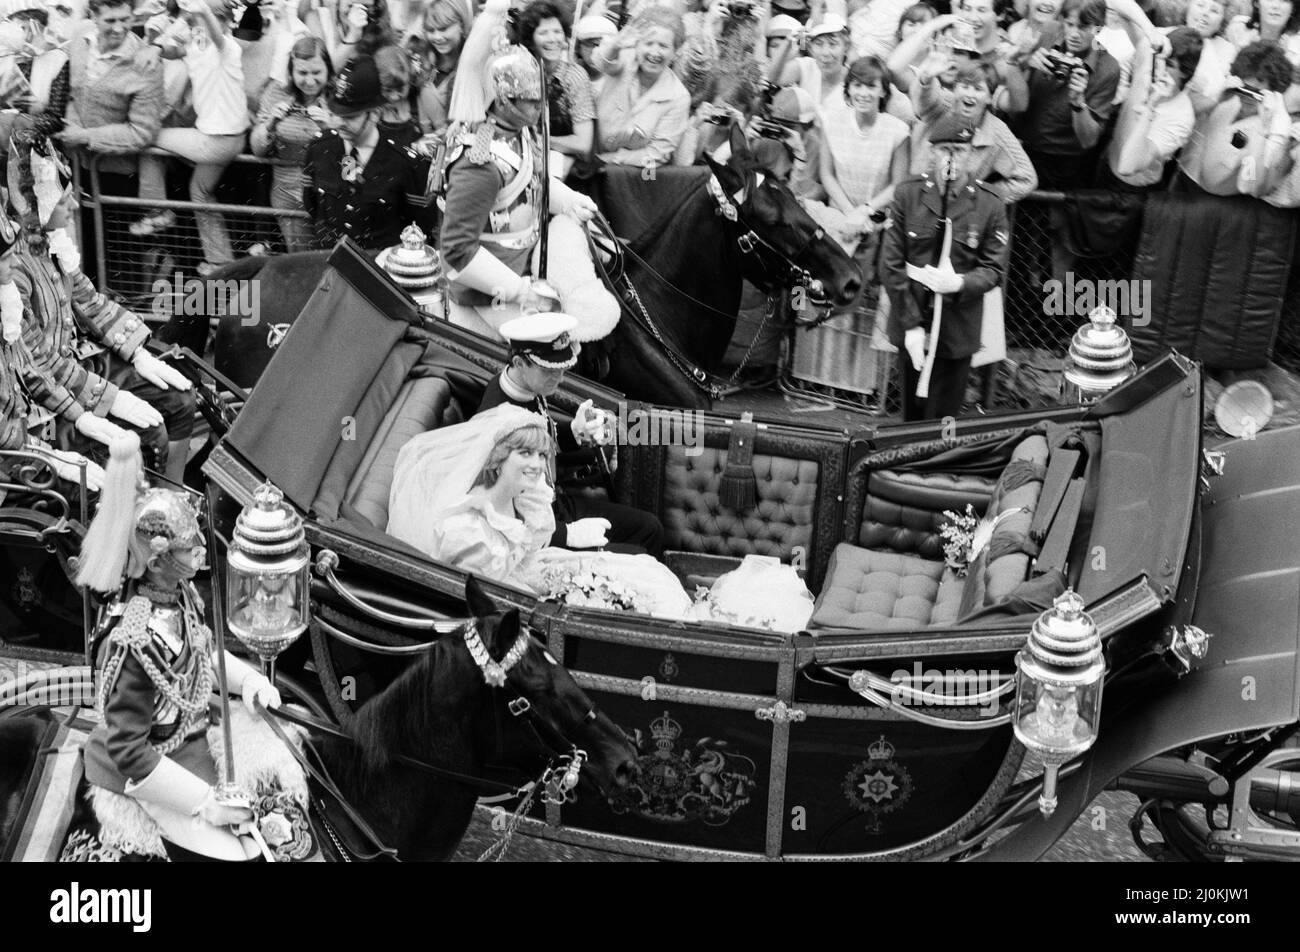 HRH Prince Charles marries Lady Diana Spencer.Picture shows the happy couple, having left St Paul's Cathedral, and now riding by carriage to Buckingham Palace.  Lady Diana's wedding dress, and it's 25 foot train has gone down as one of the most famous wedding dresses in history.  The dress was designed by David and Elizabeth Emanuel.  Picture taken 29th July 1981 Stock Photo